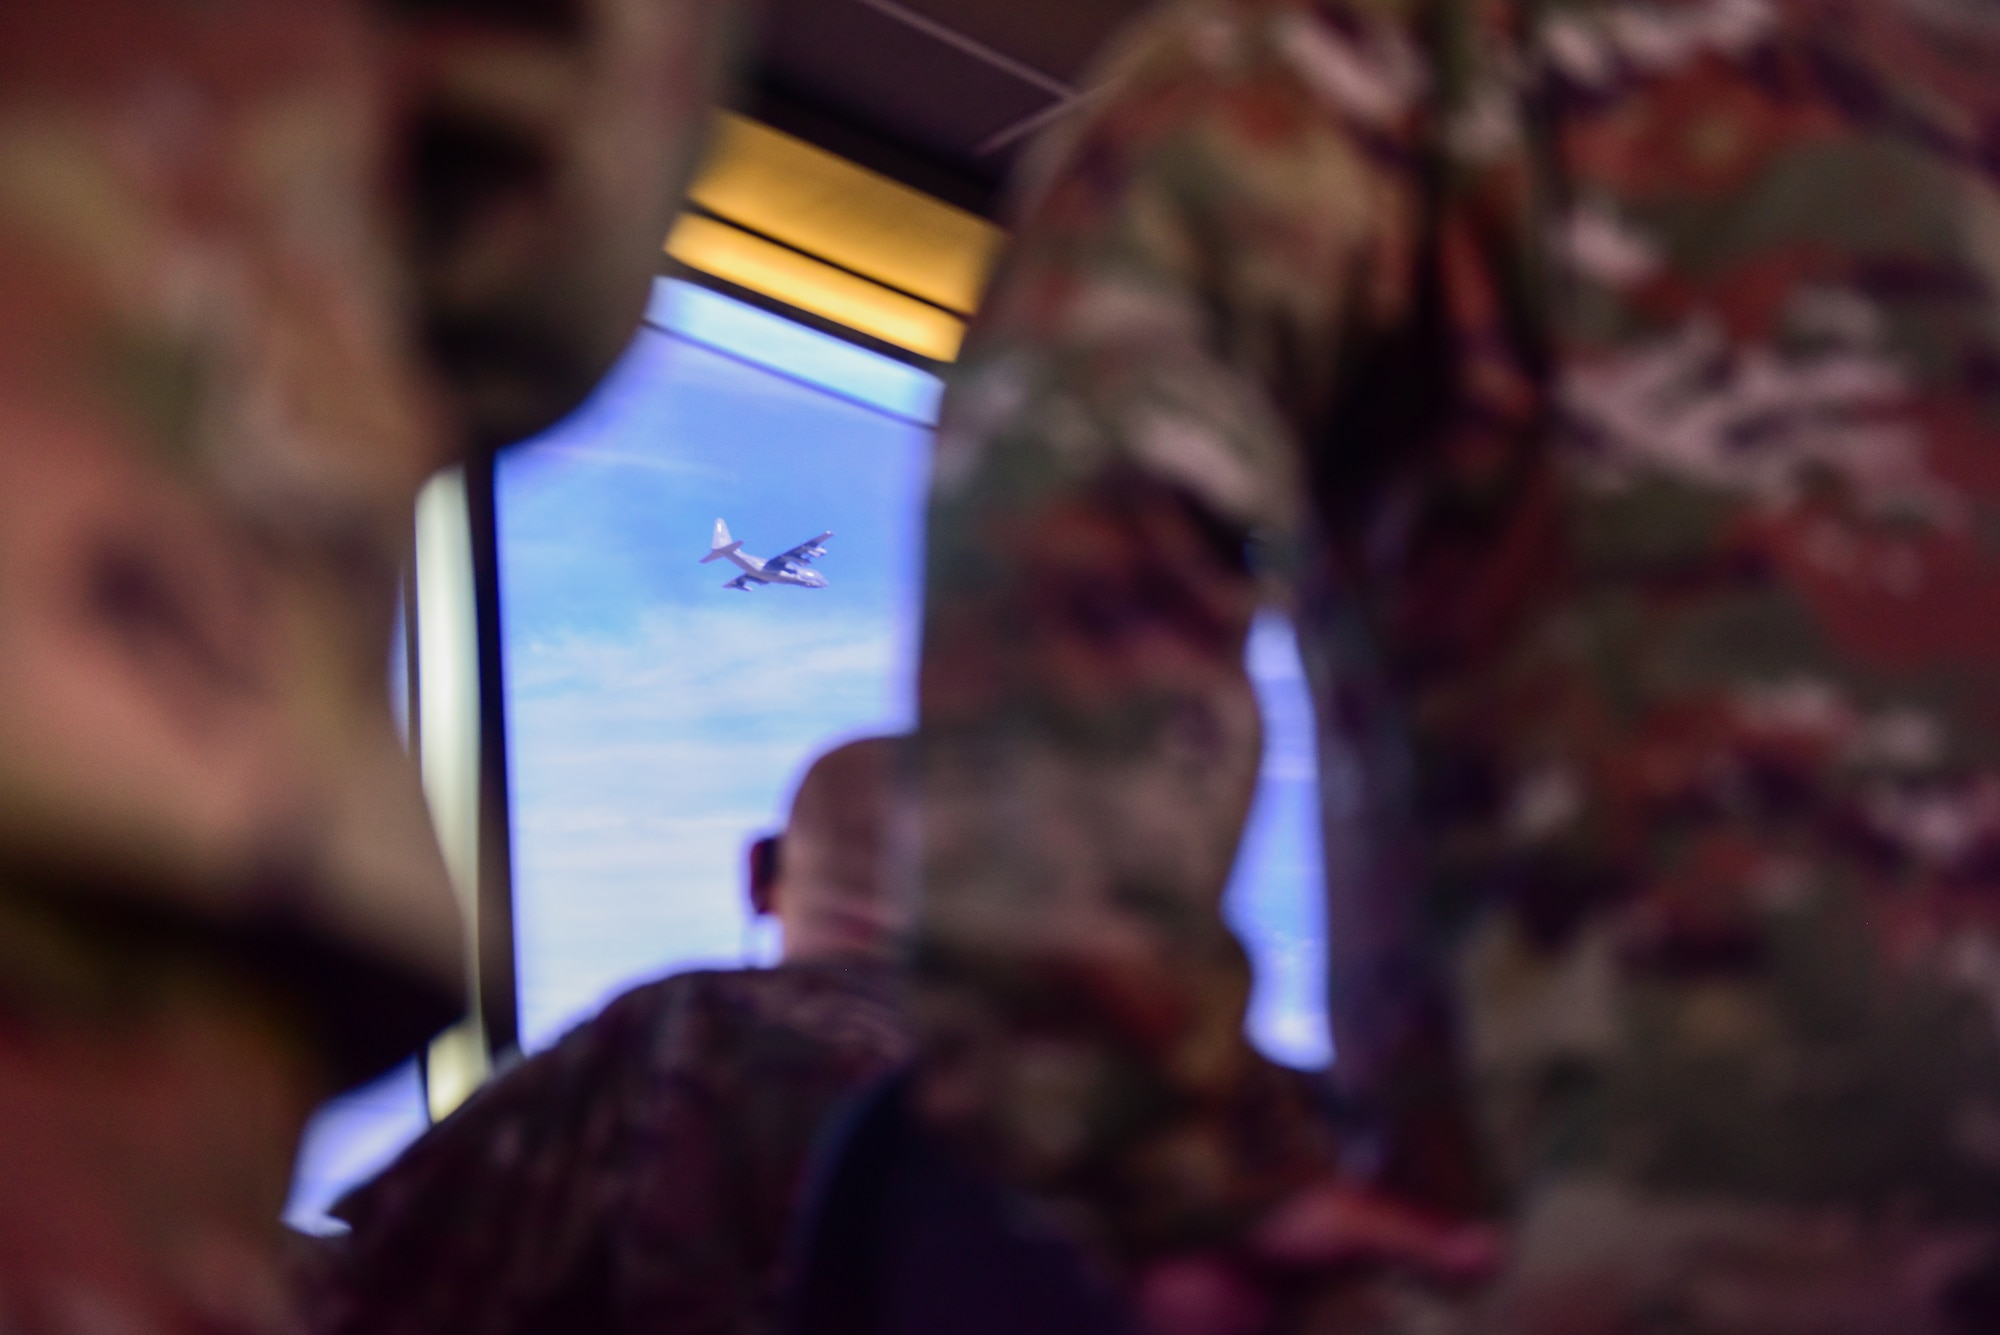 A photo of airmen watching a plane take off